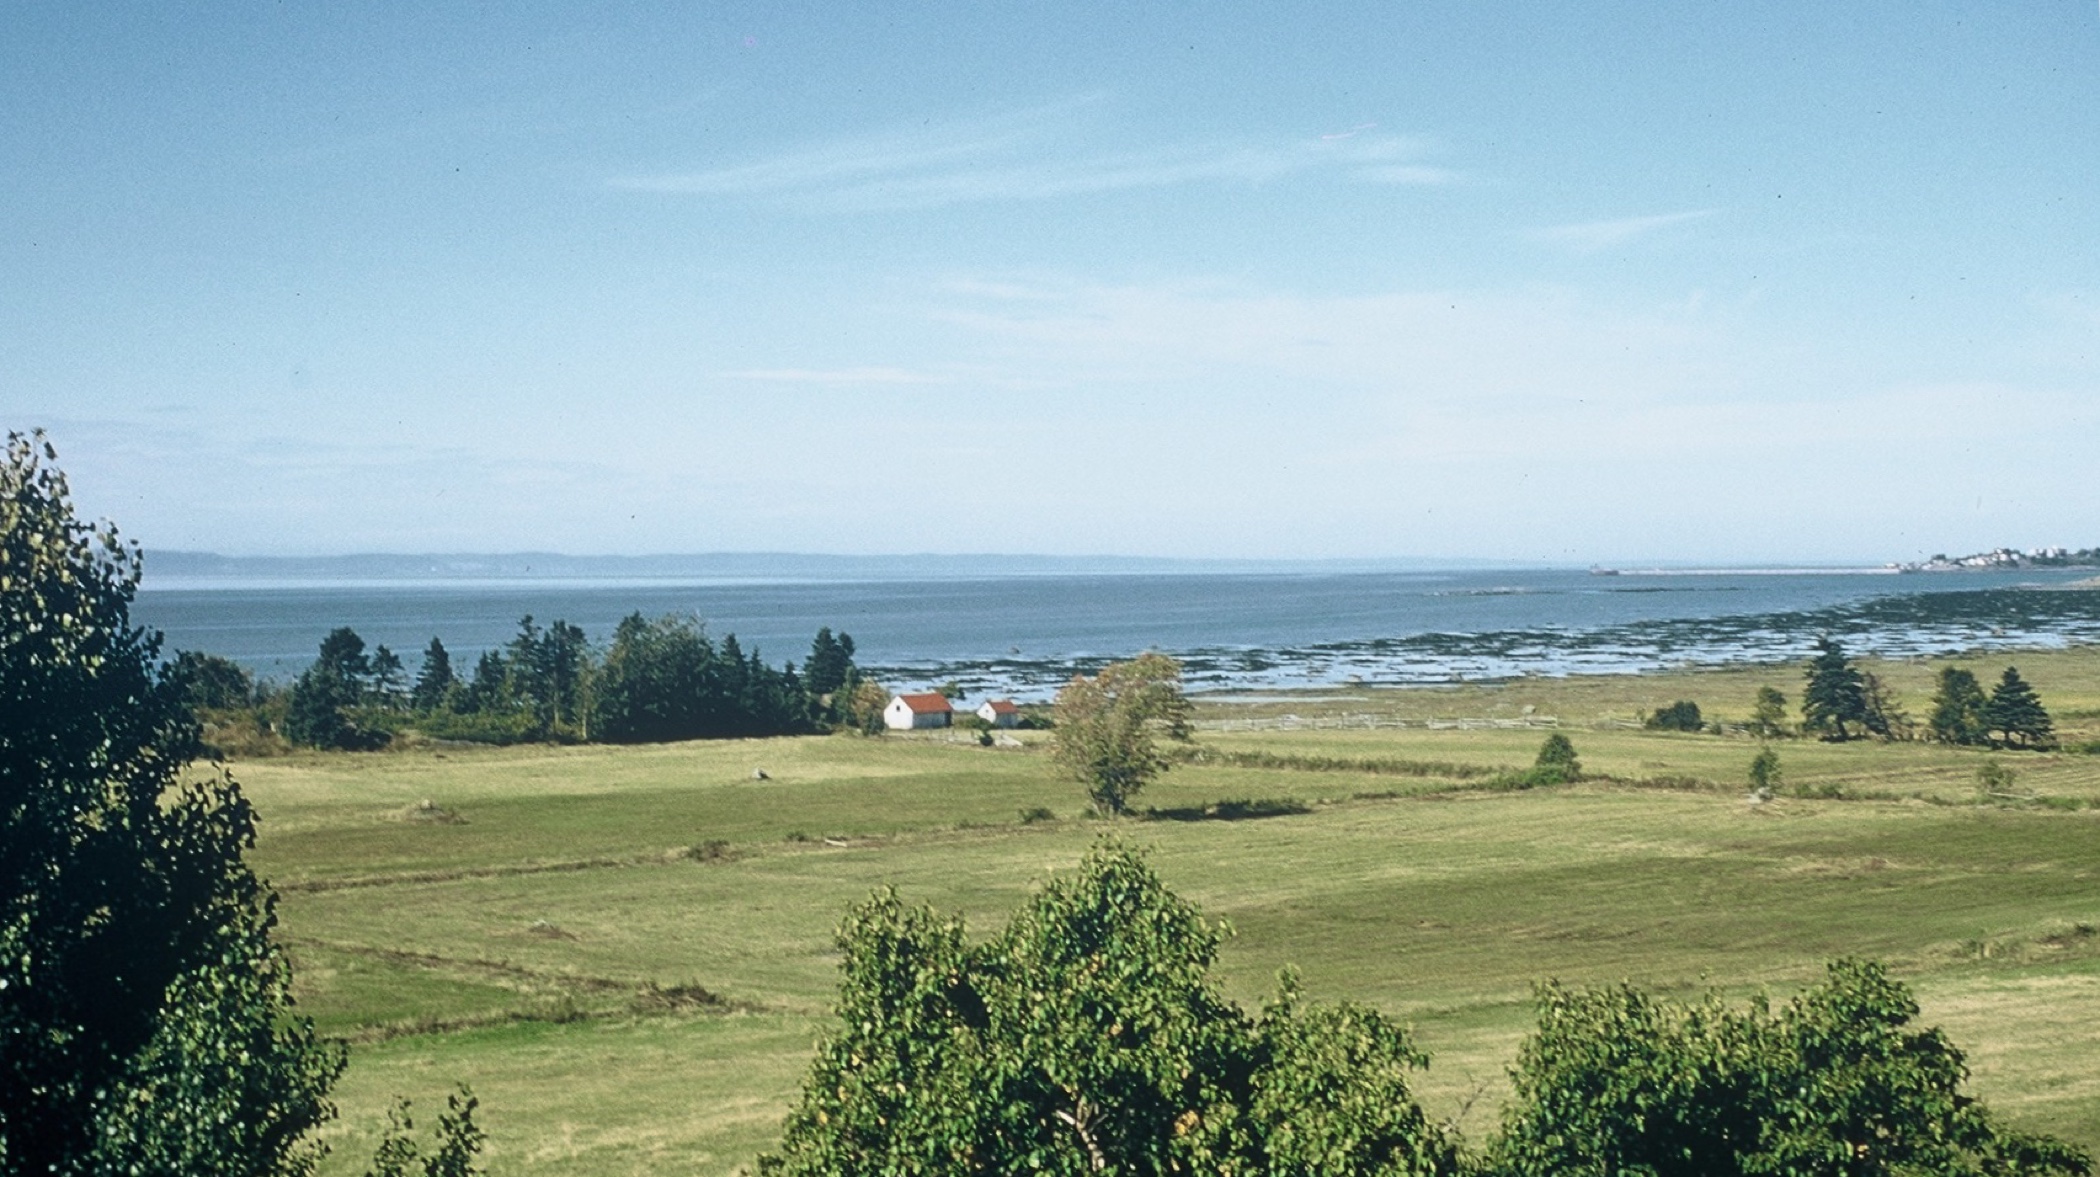 Colour photograph of agricultural fields leading down to the Saint Lawrence River near Rivière-du-Loup, at the edge of which is a line of trees and two small wooden buildings.